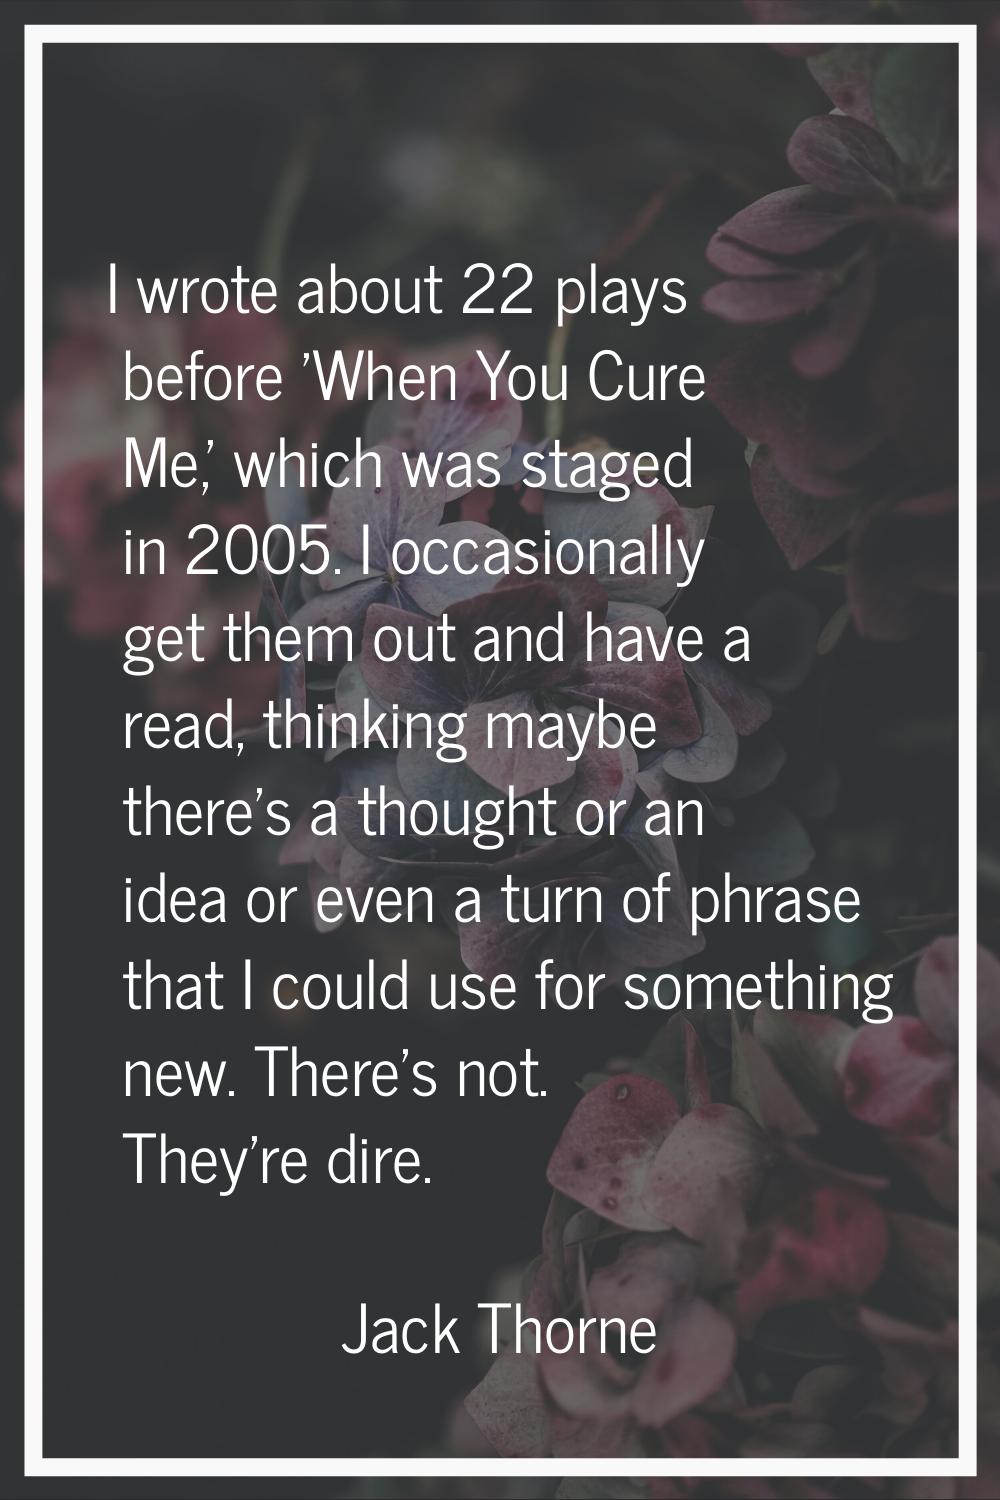 I wrote about 22 plays before 'When You Cure Me,' which was staged in 2005. I occasionally get them